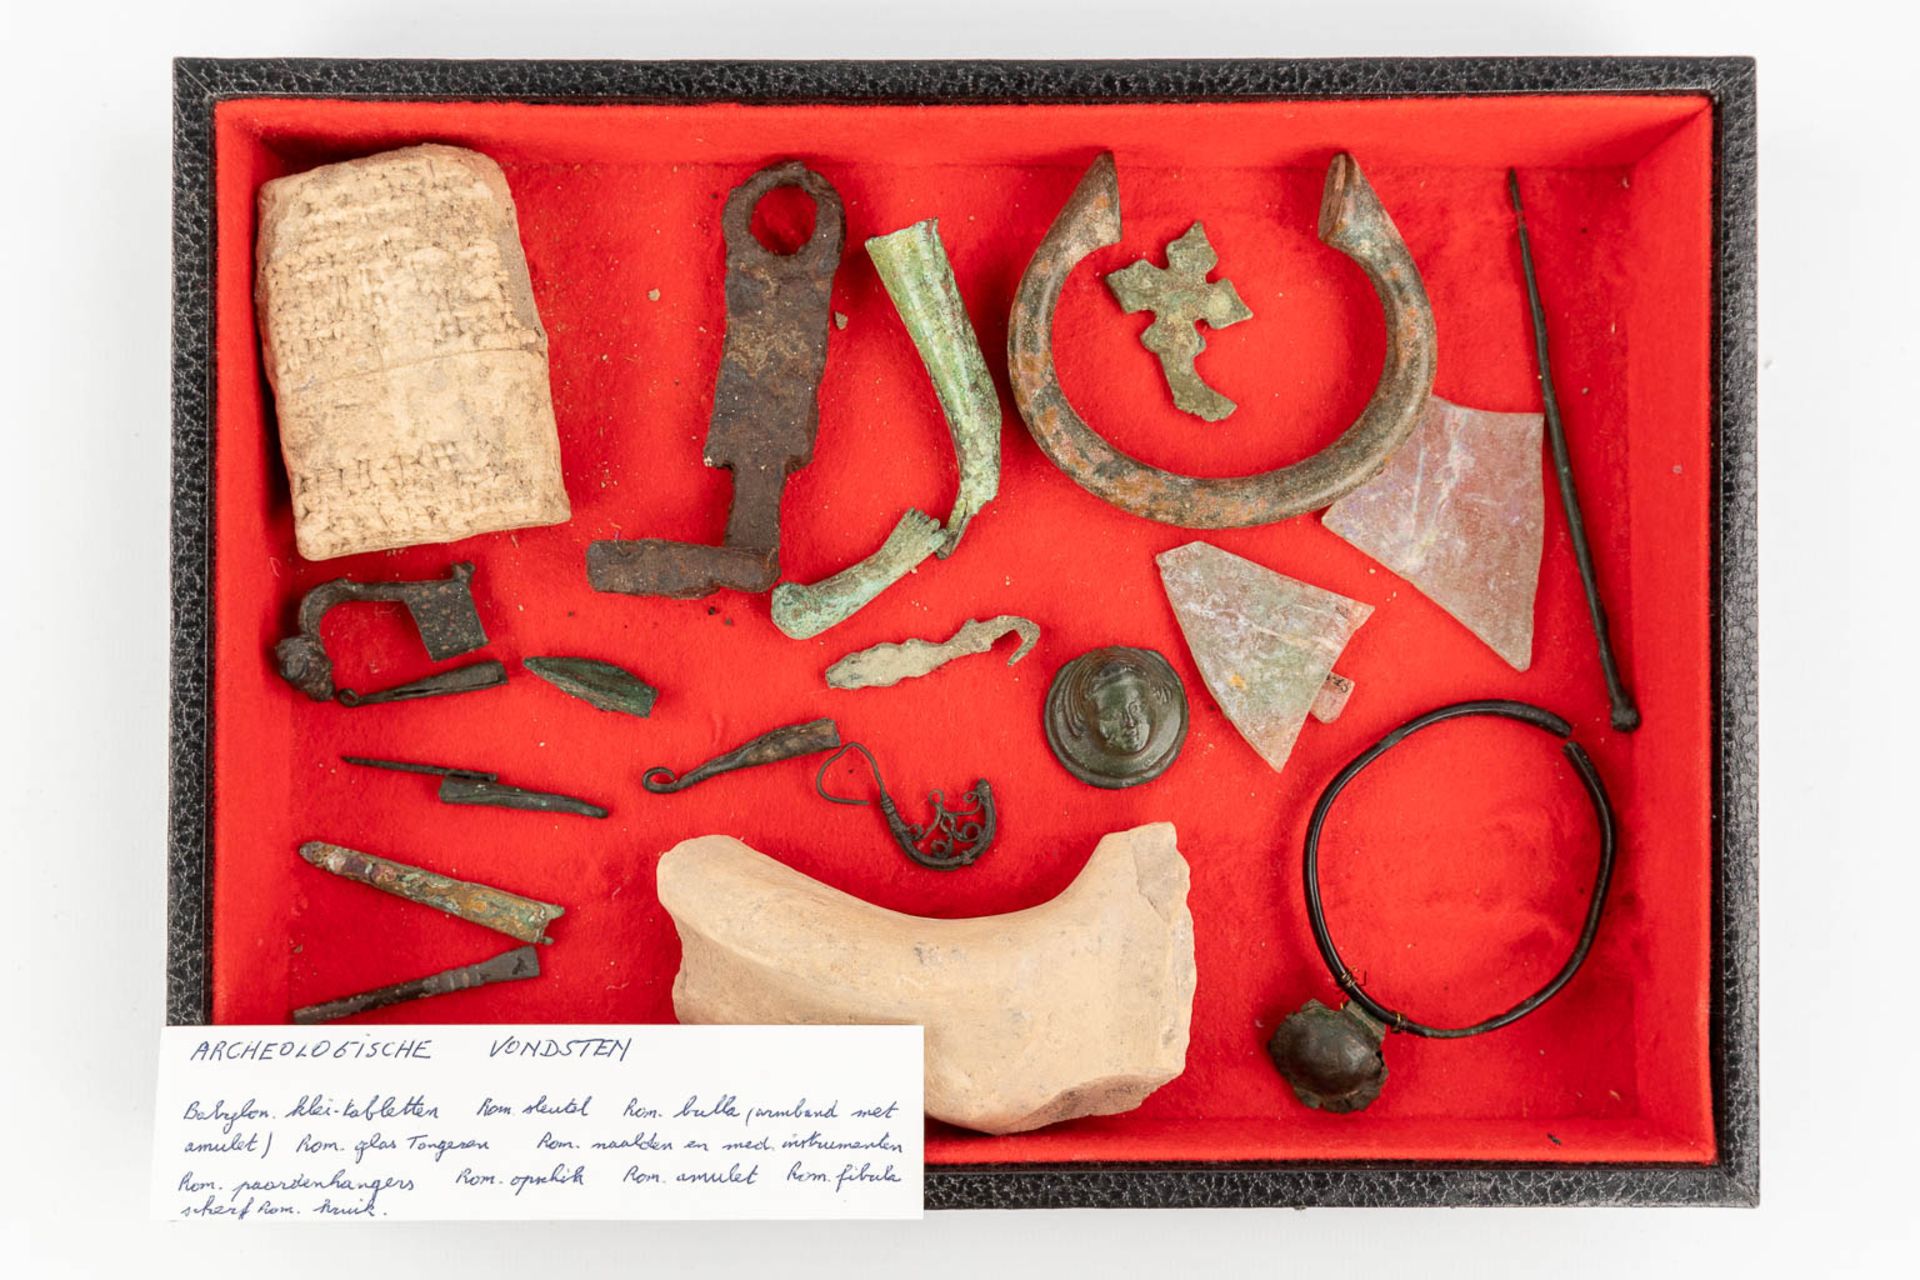 A collection of Archeological finds. - Image 16 of 17